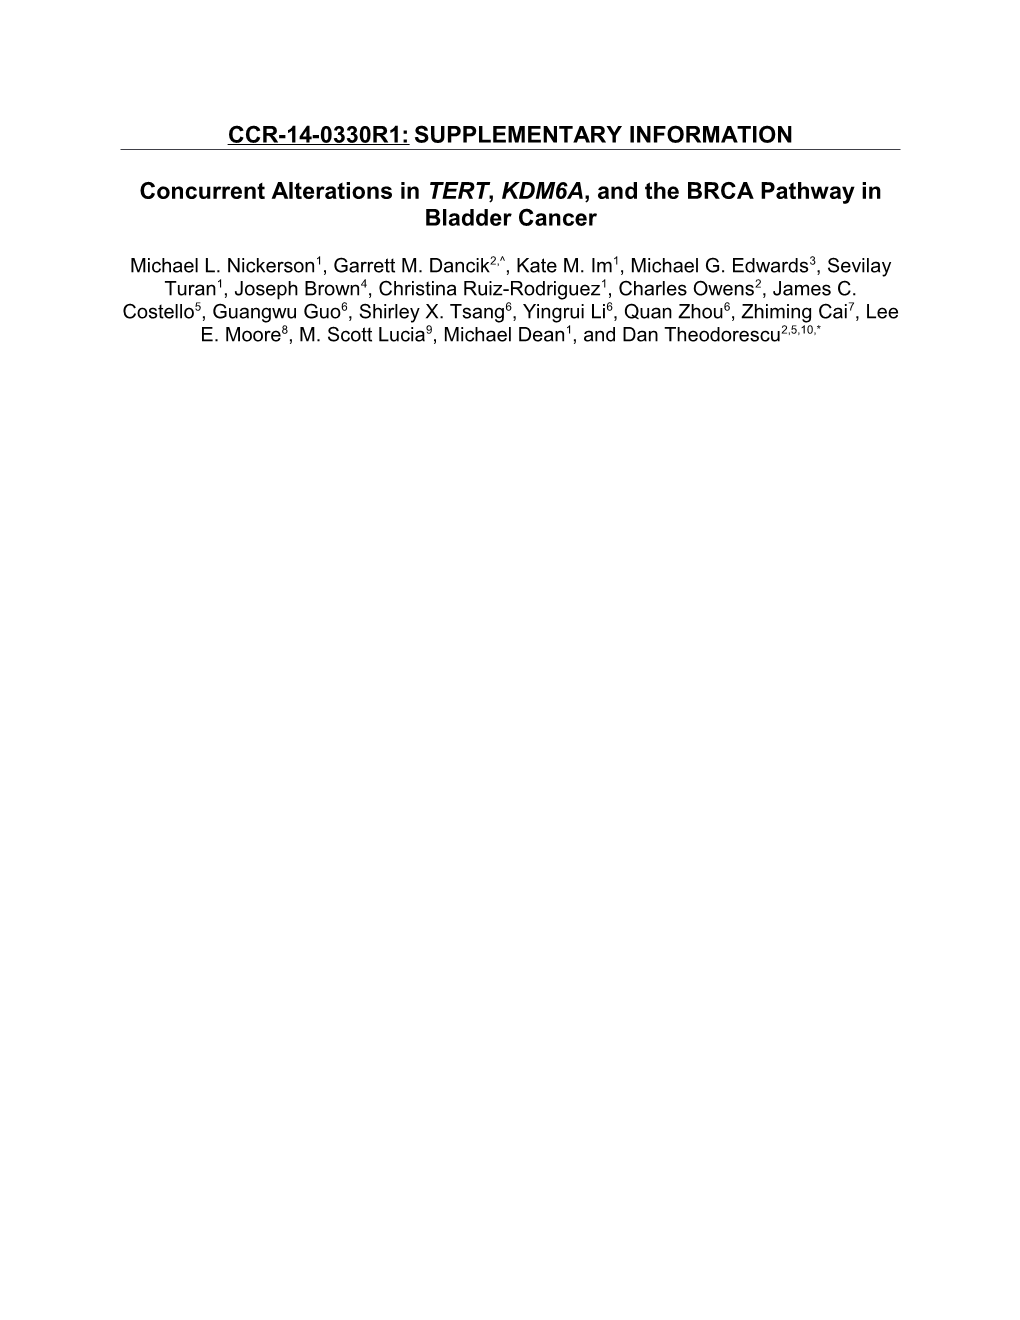 Concurrent Alterations in TERT, KDM6A, and the BRCA Pathway in Bladder Cancer